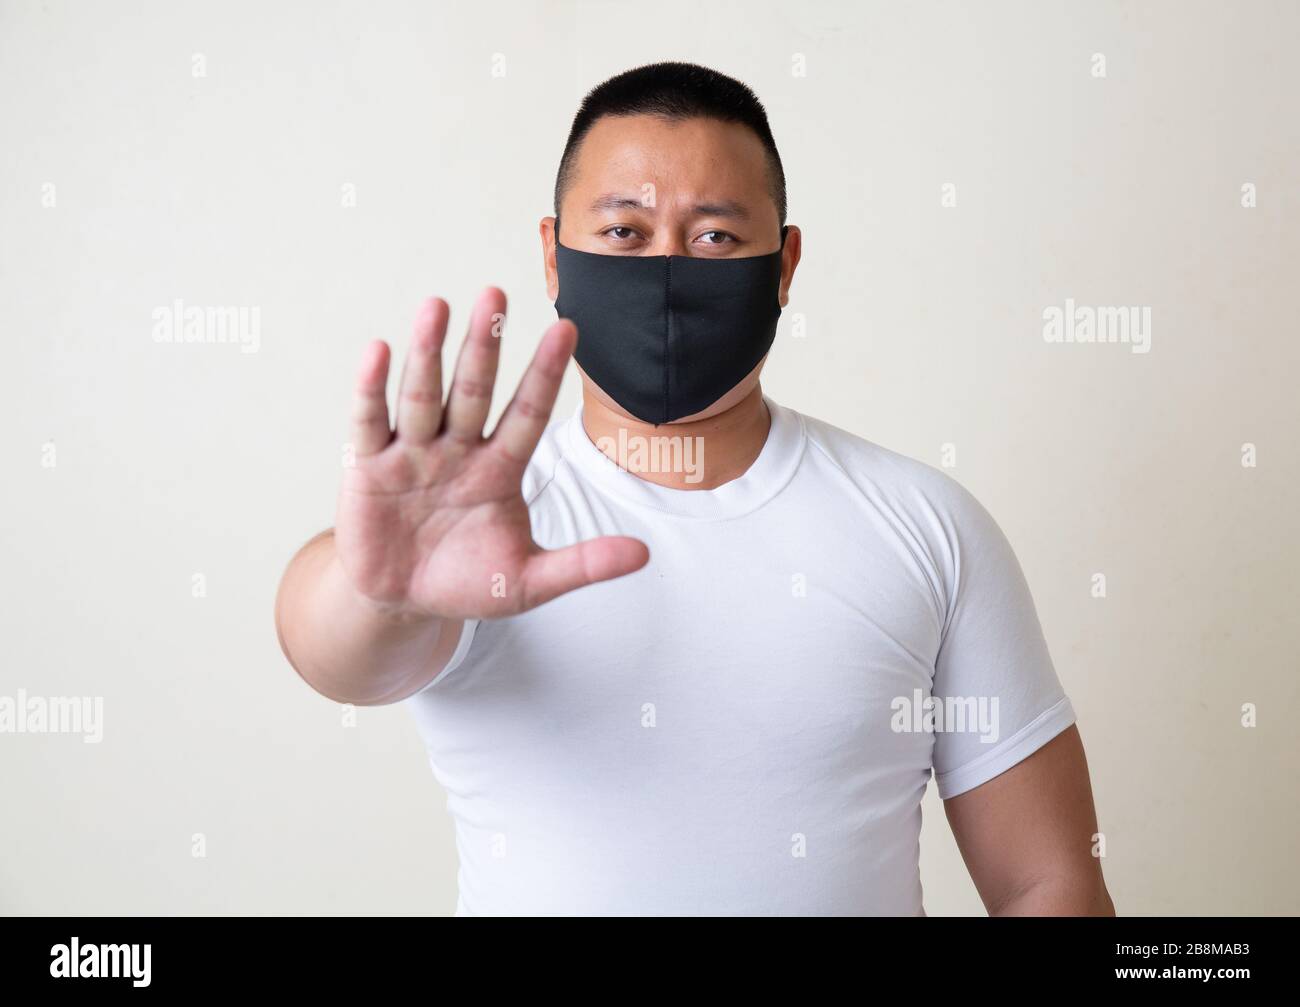 Asian Man in medical mask Coronavirus pandemic disease on grey background. COVID-19 virus from China epidemic outbreak to global recession concept for Stock Photo